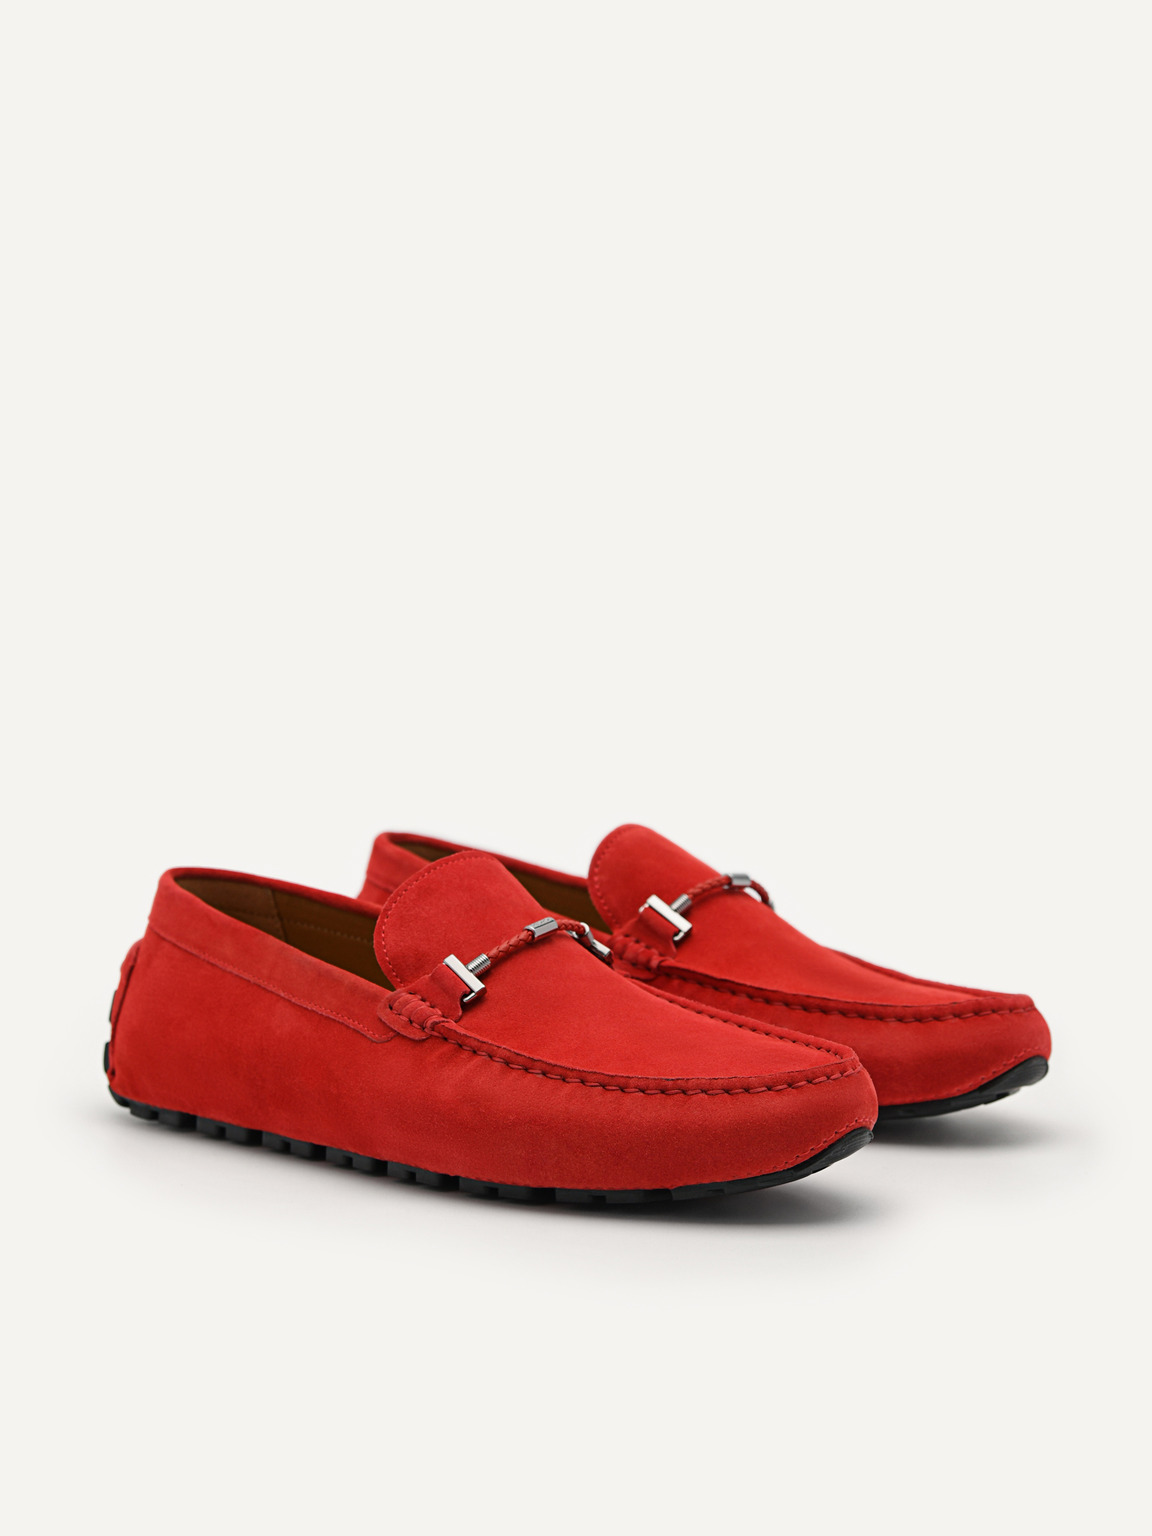 Robert Suede Driving Shoes, Red